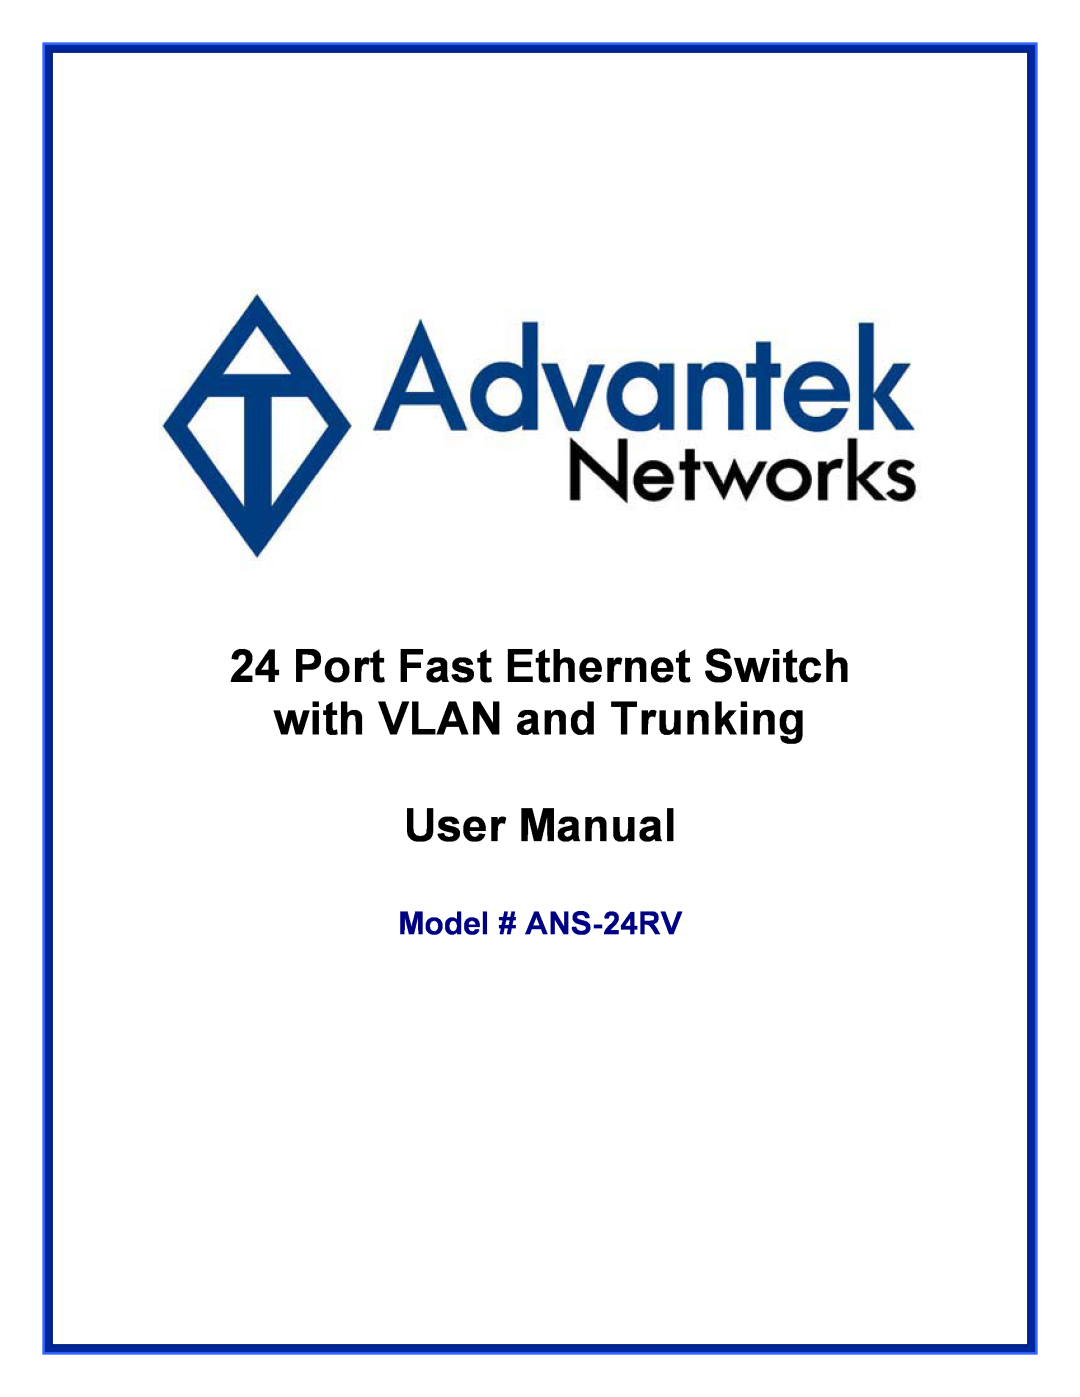 Advantek Networks user manual Port Fast Ethernet Switch with VLAN and Trunking User Manual, Model # ANS-24RV 